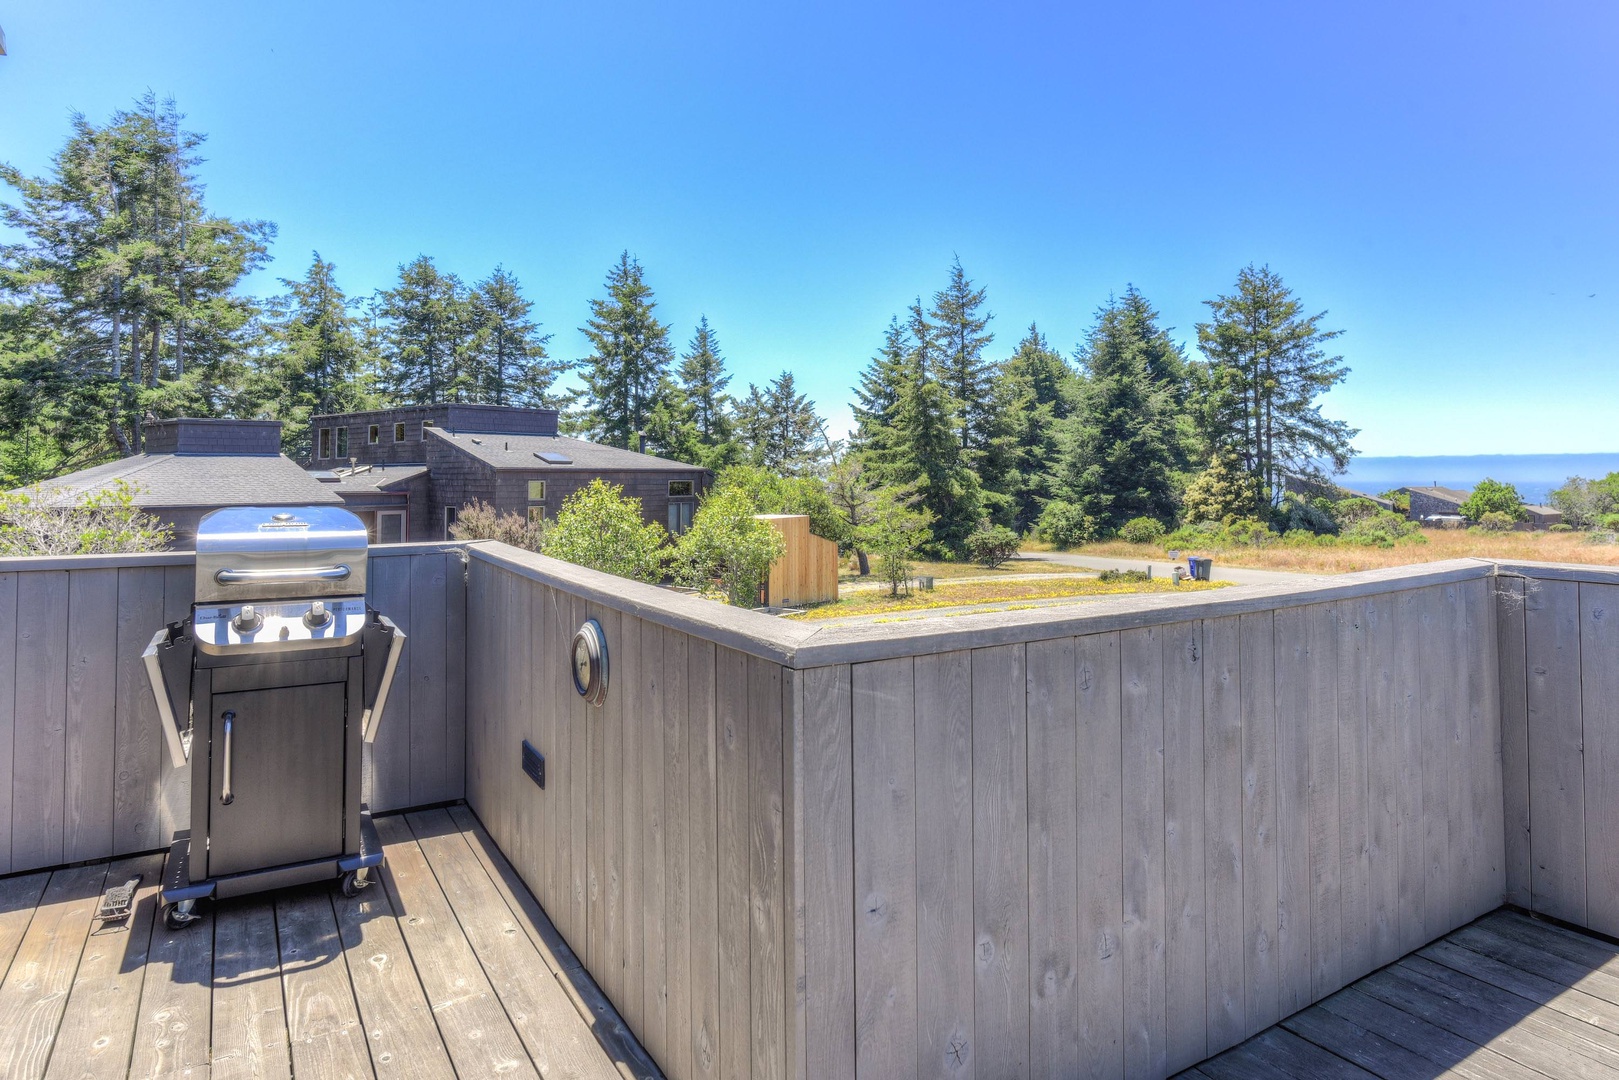 Deck with BBQ, seating, hot tub, and ocean views